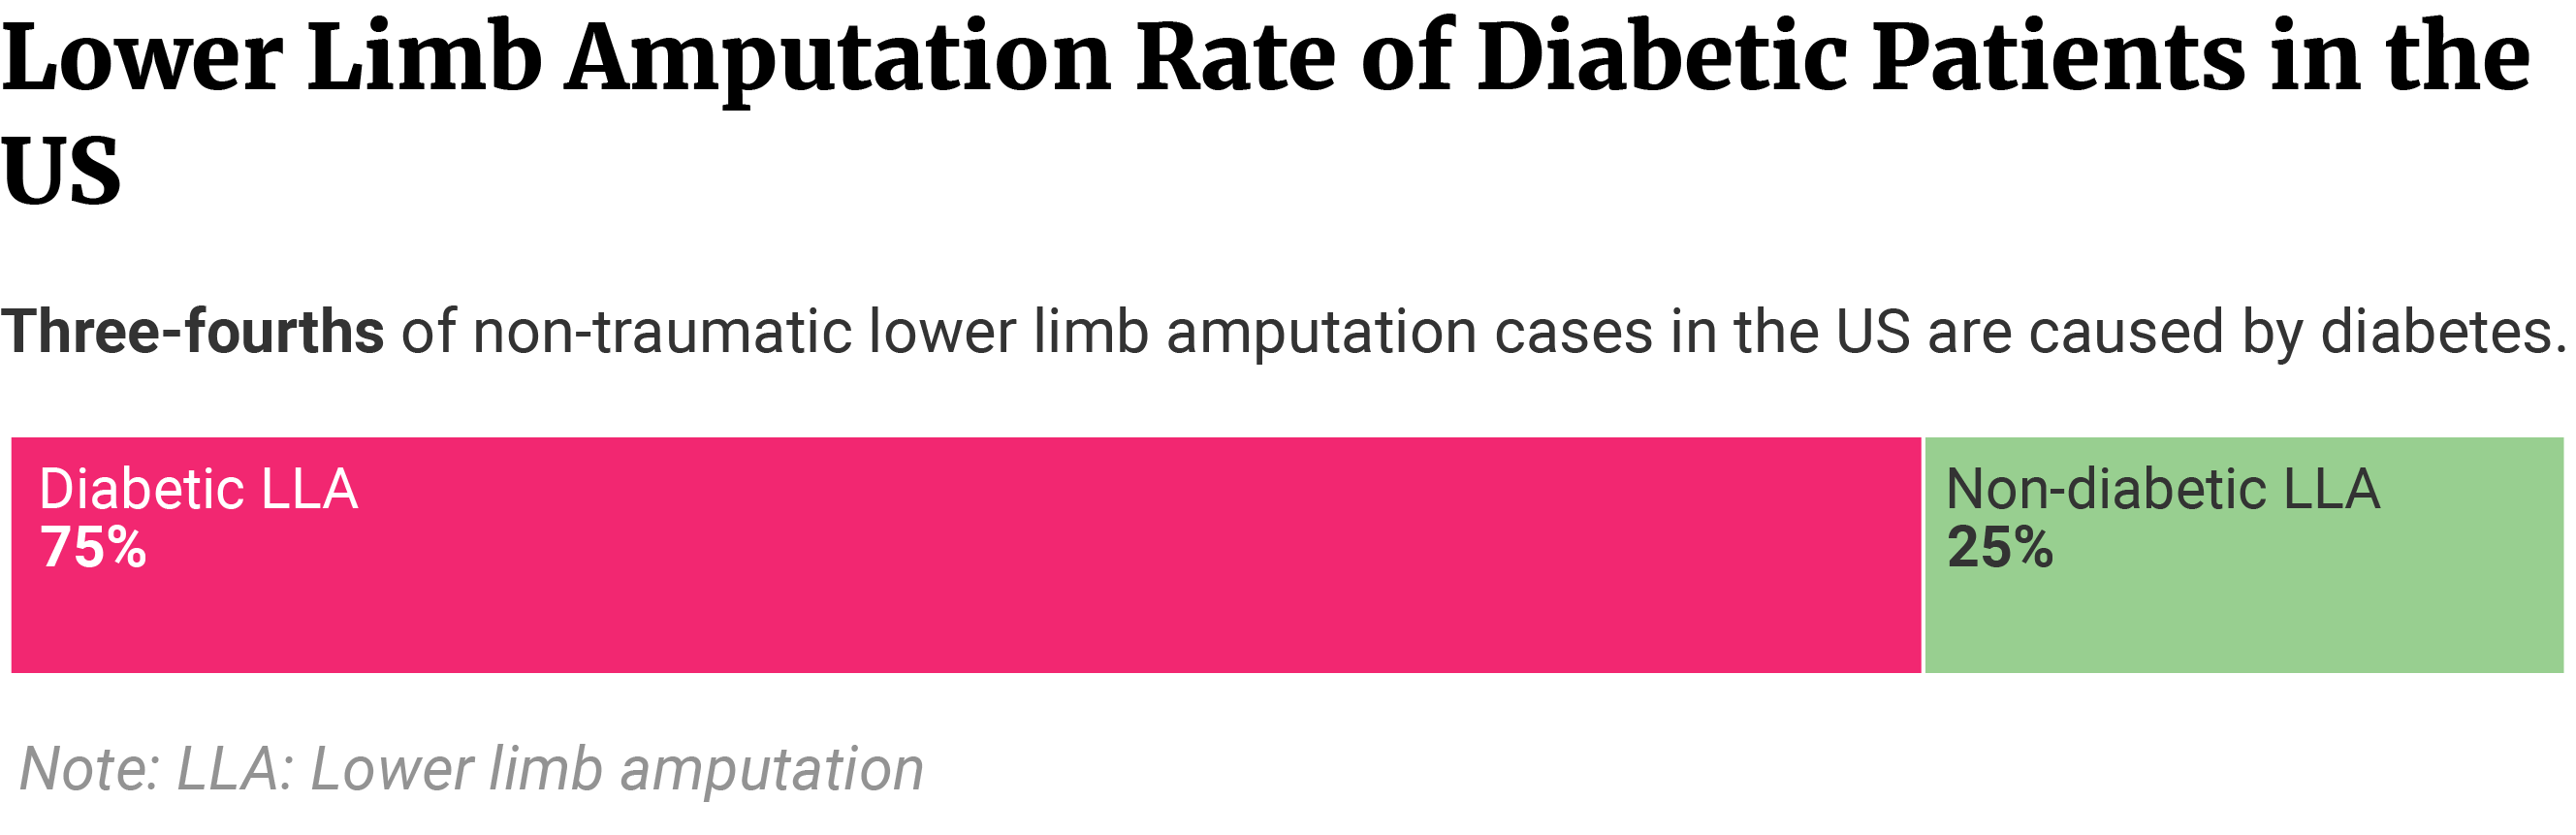 Stacked bar showing 75% of lower limb amputations in the US are caused by diabetes.